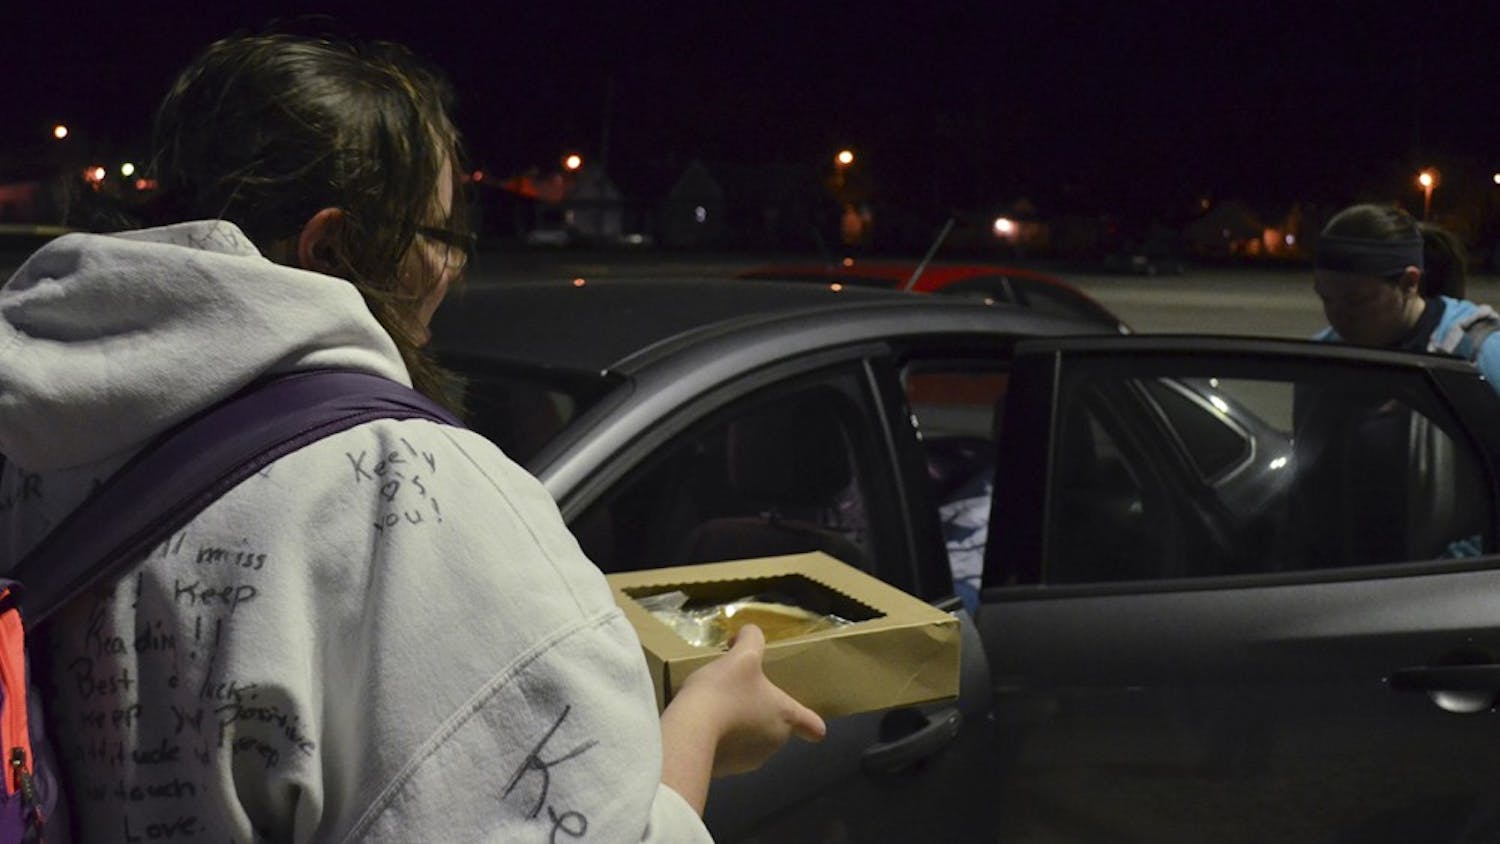 Nicole Allen packs a portion of her belongings into her roommate's car before leaving for Thanksgiving Break. One item she's bringing is a homemade pumpkin pie given to her for her birthday.